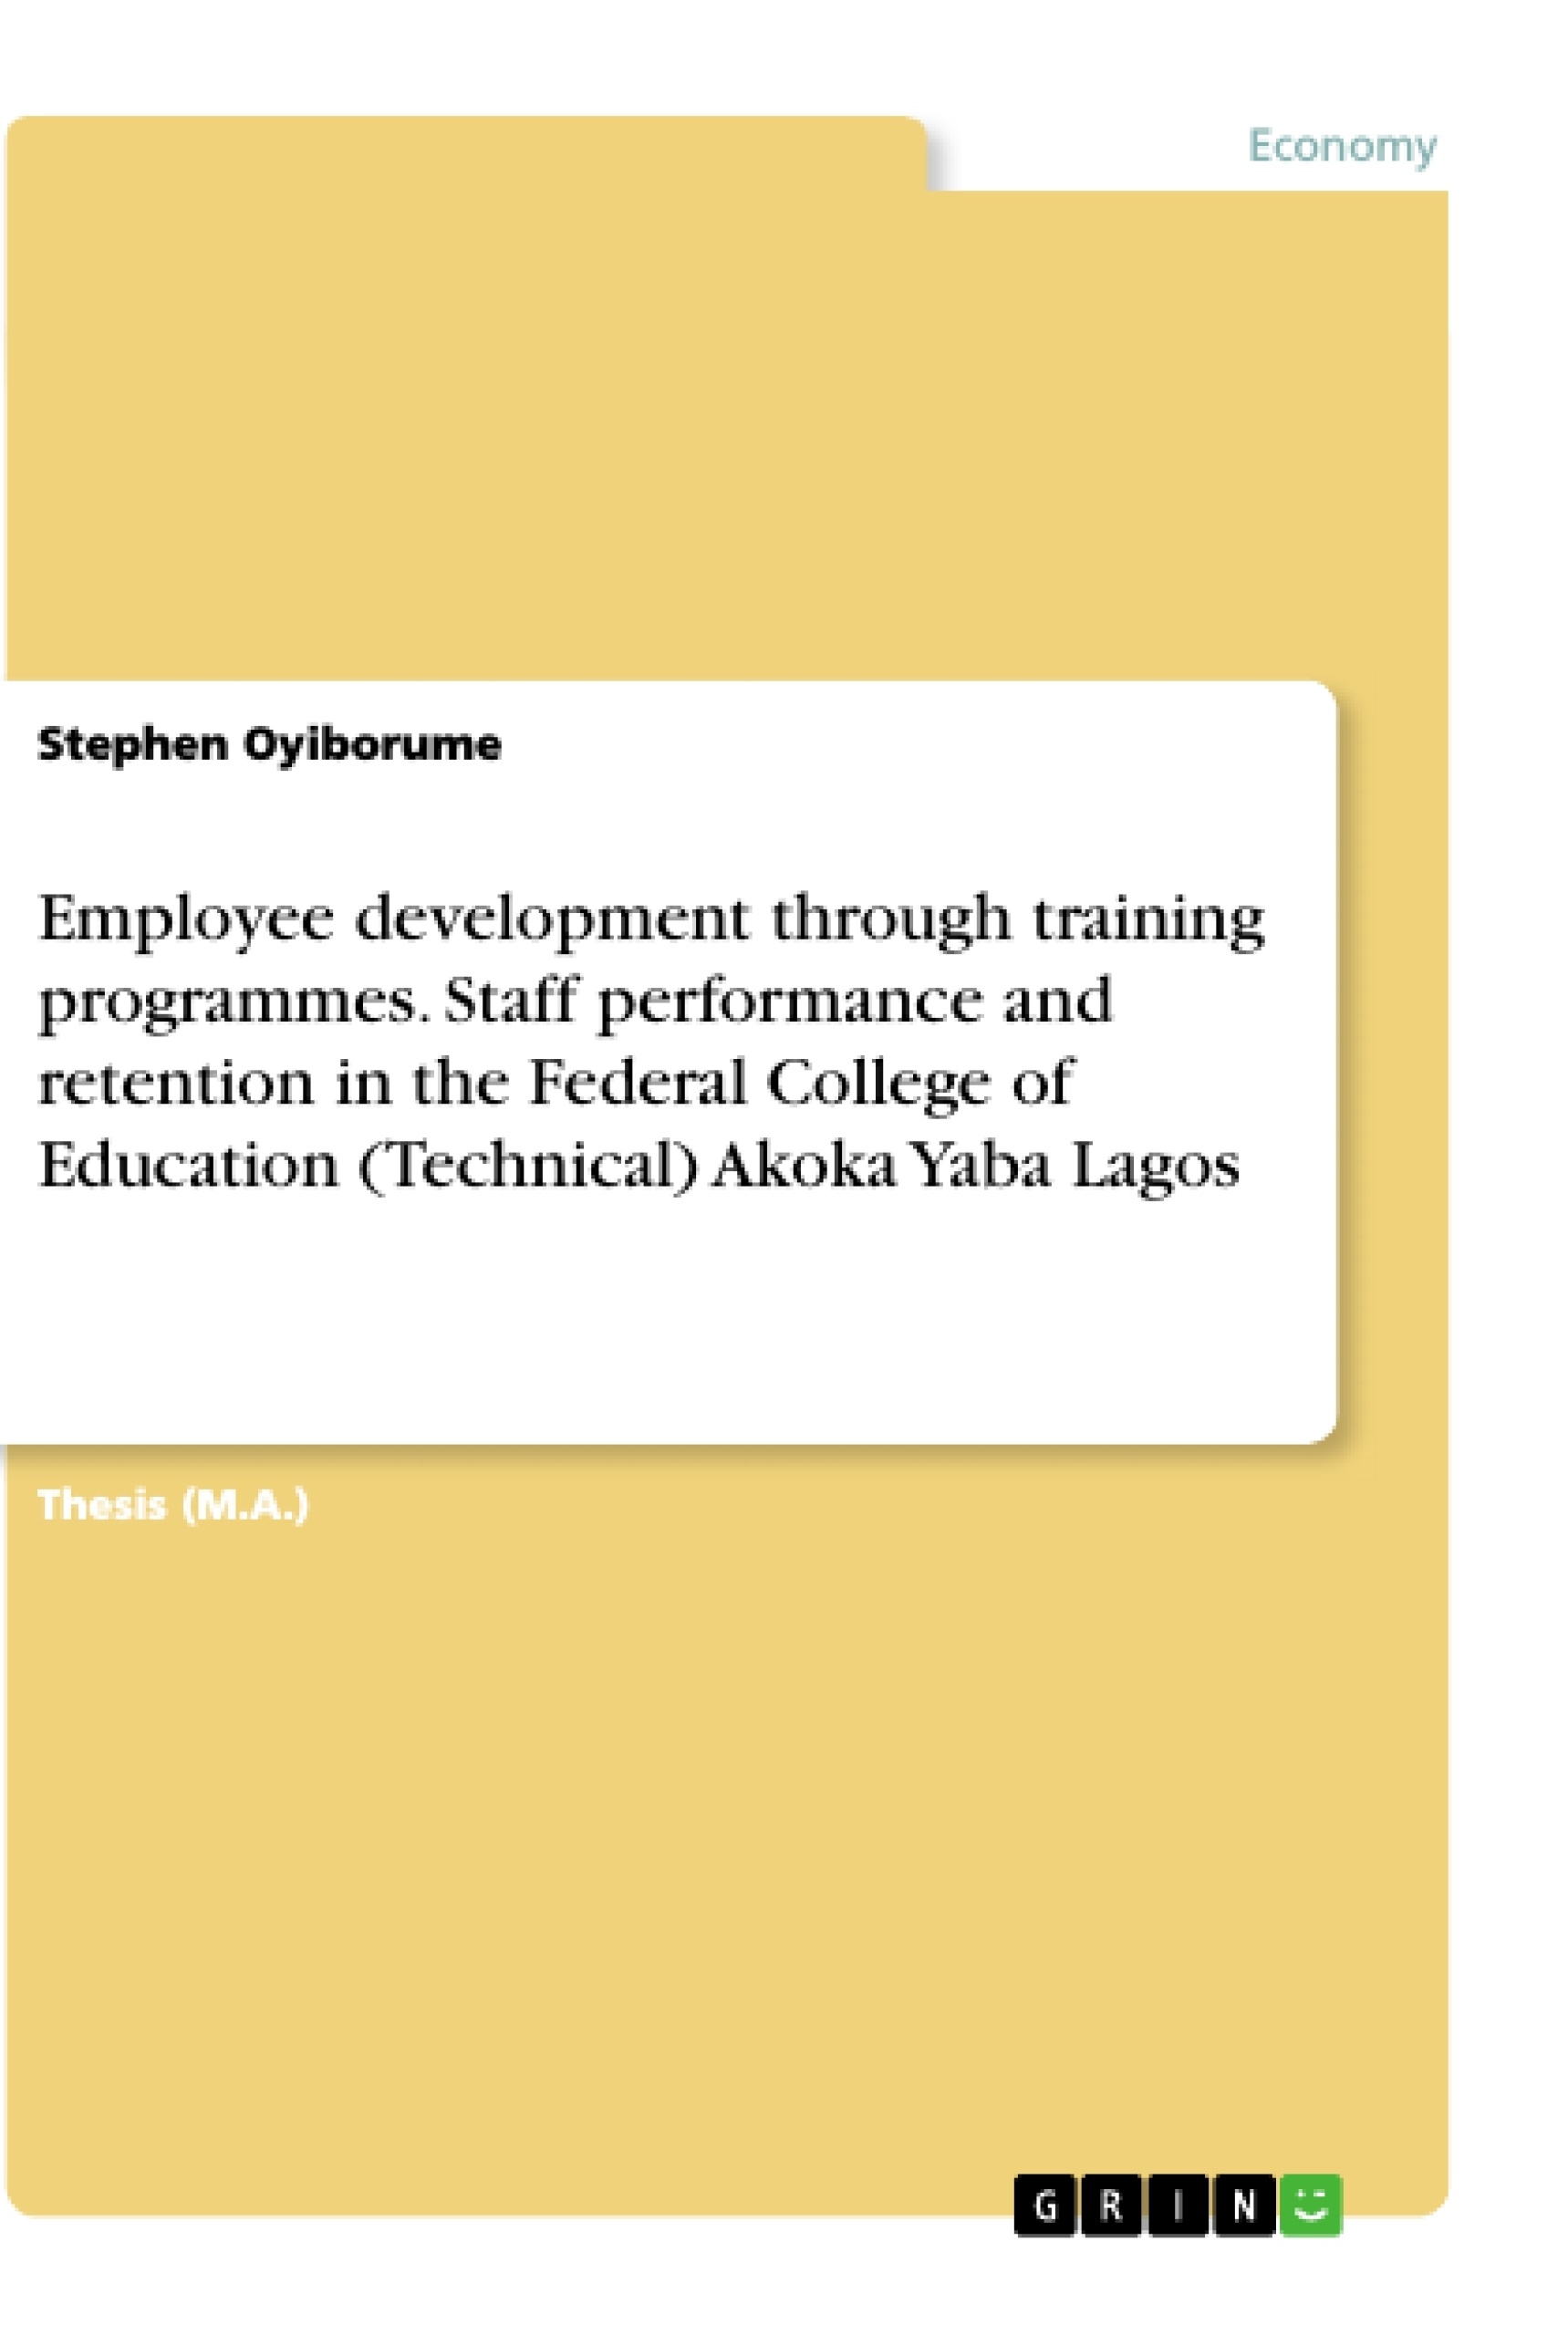 Titre: Employee development through training programmes. Staff performance and retention in the Federal College of Education (Technical) Akoka Yaba Lagos